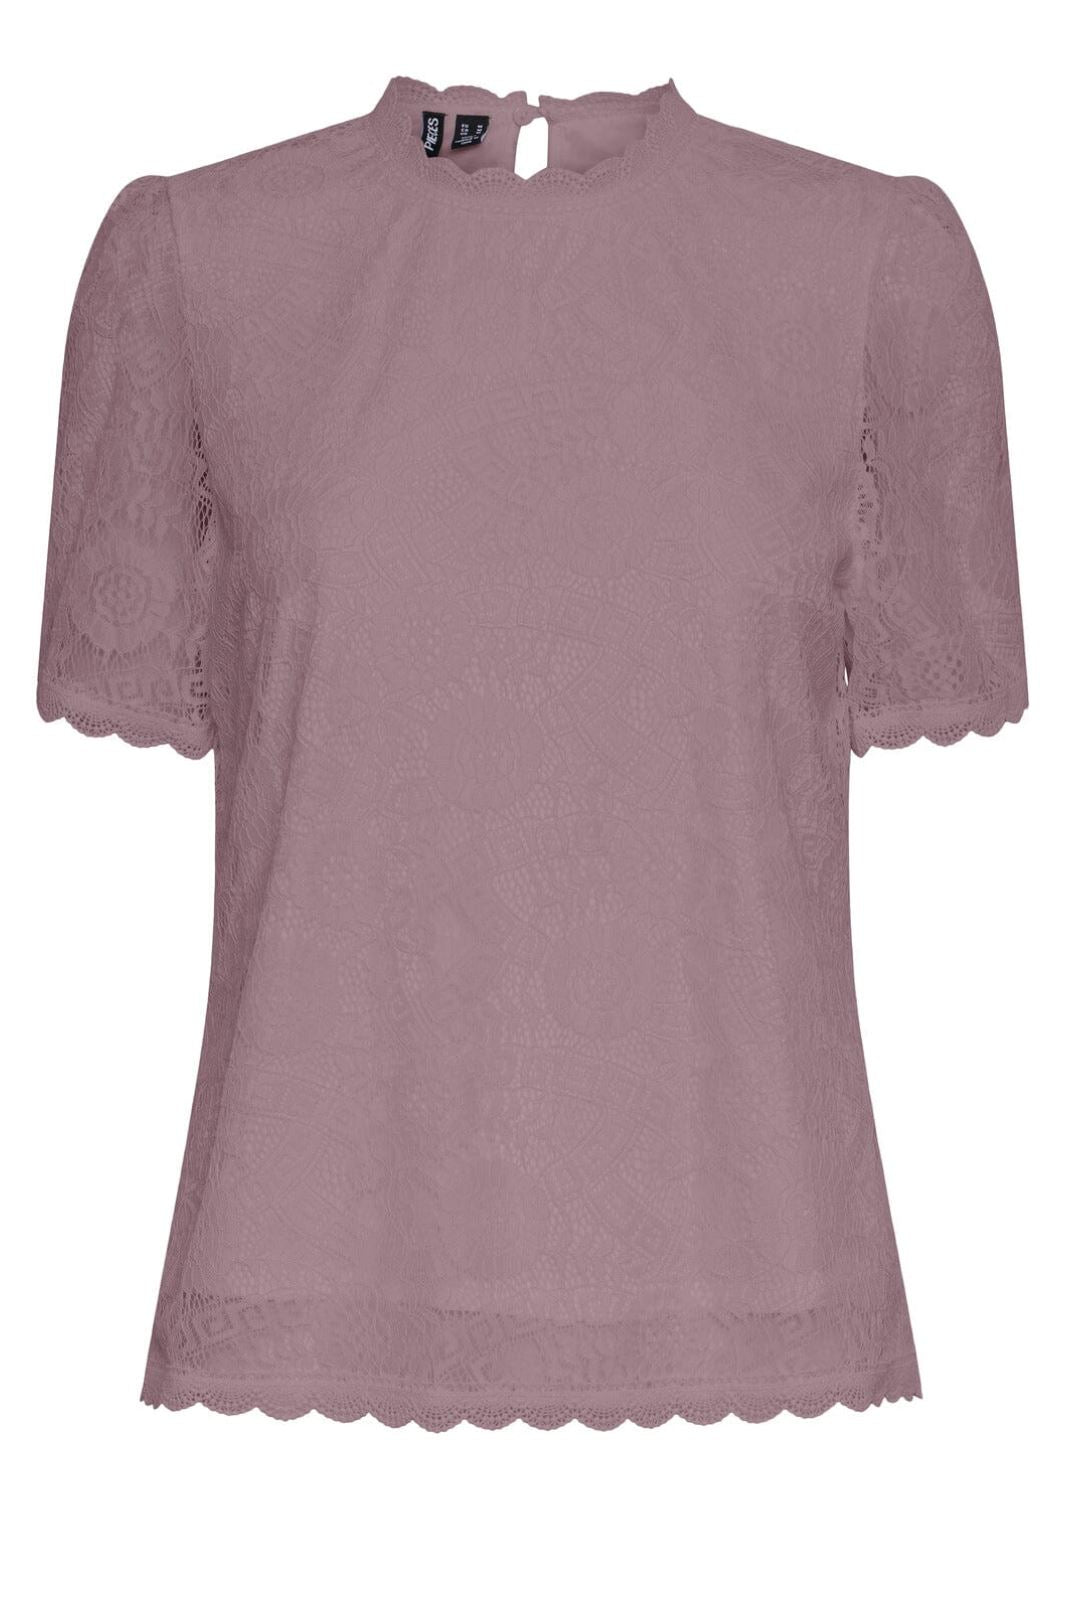 Pieces - Pcolline Ss Lace Top - 4474972 Woodrose T-shirts 